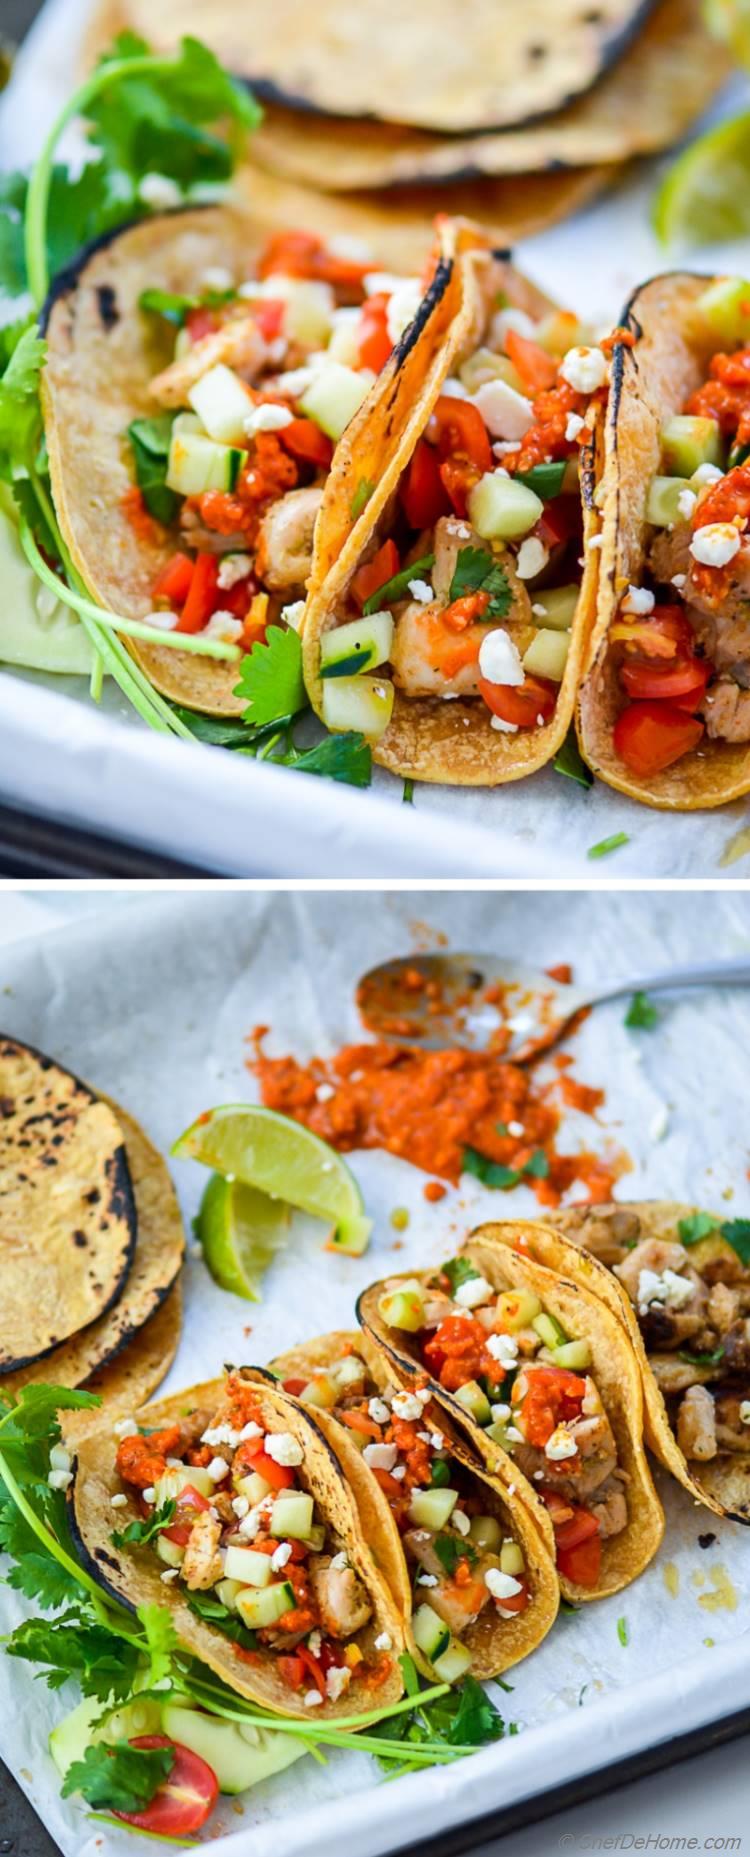 Cilantro Lime Chicken Tacos with Roasted Red Pepper Romesco Sauce for a Family-style Taco Night | chefdehome.com